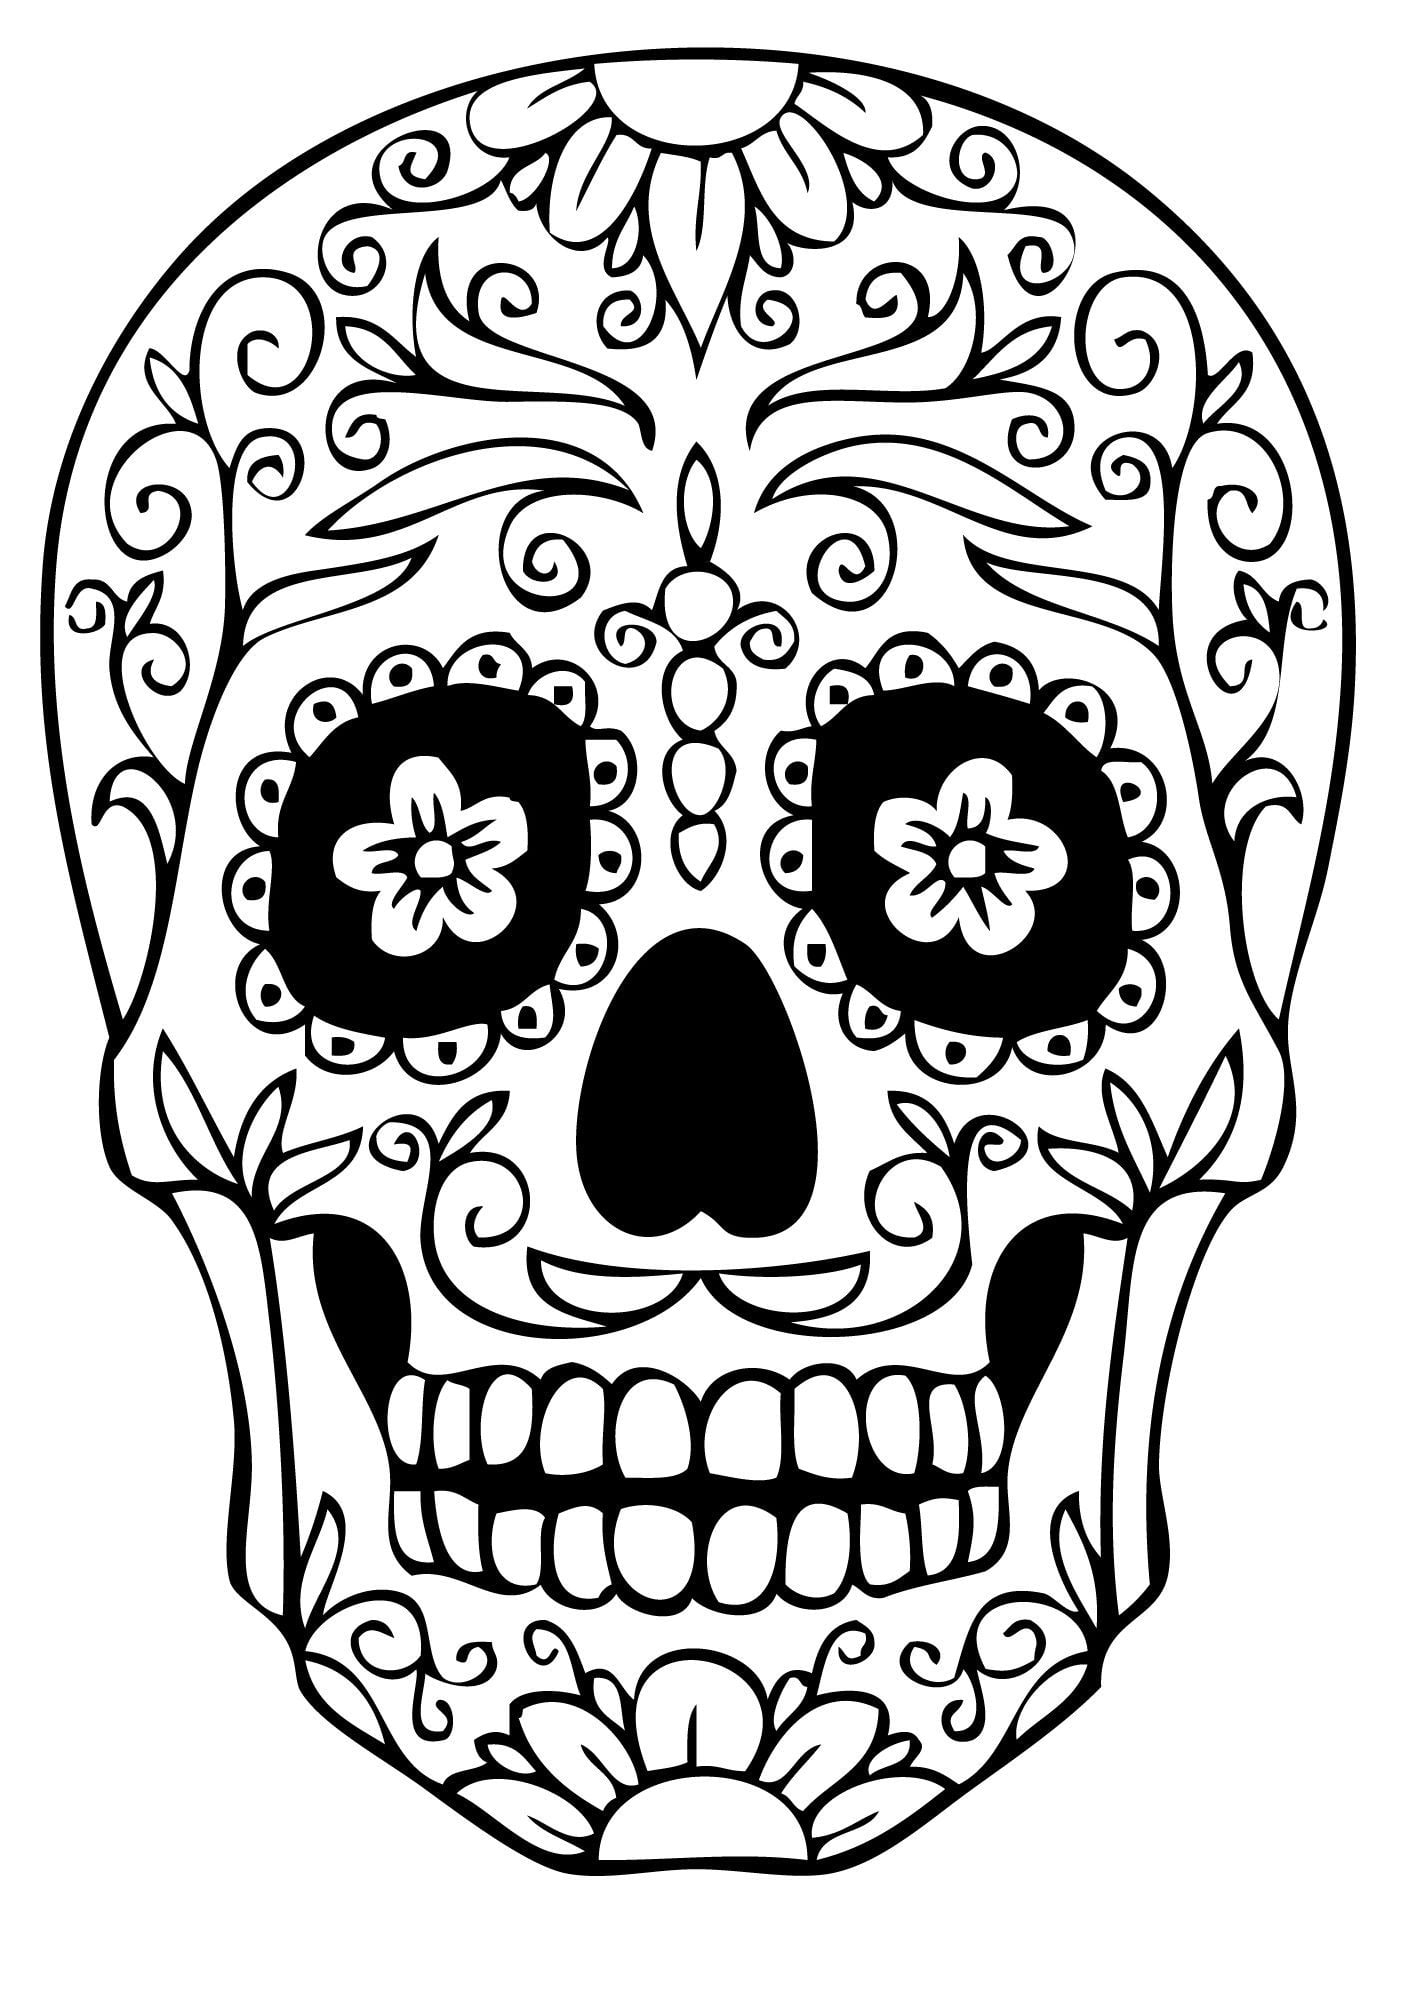 Skull Coloring Pages For Developing Knowledge In Human Physiology Skull Coloring Pages Sugar Skull Drawing Coloring Pages